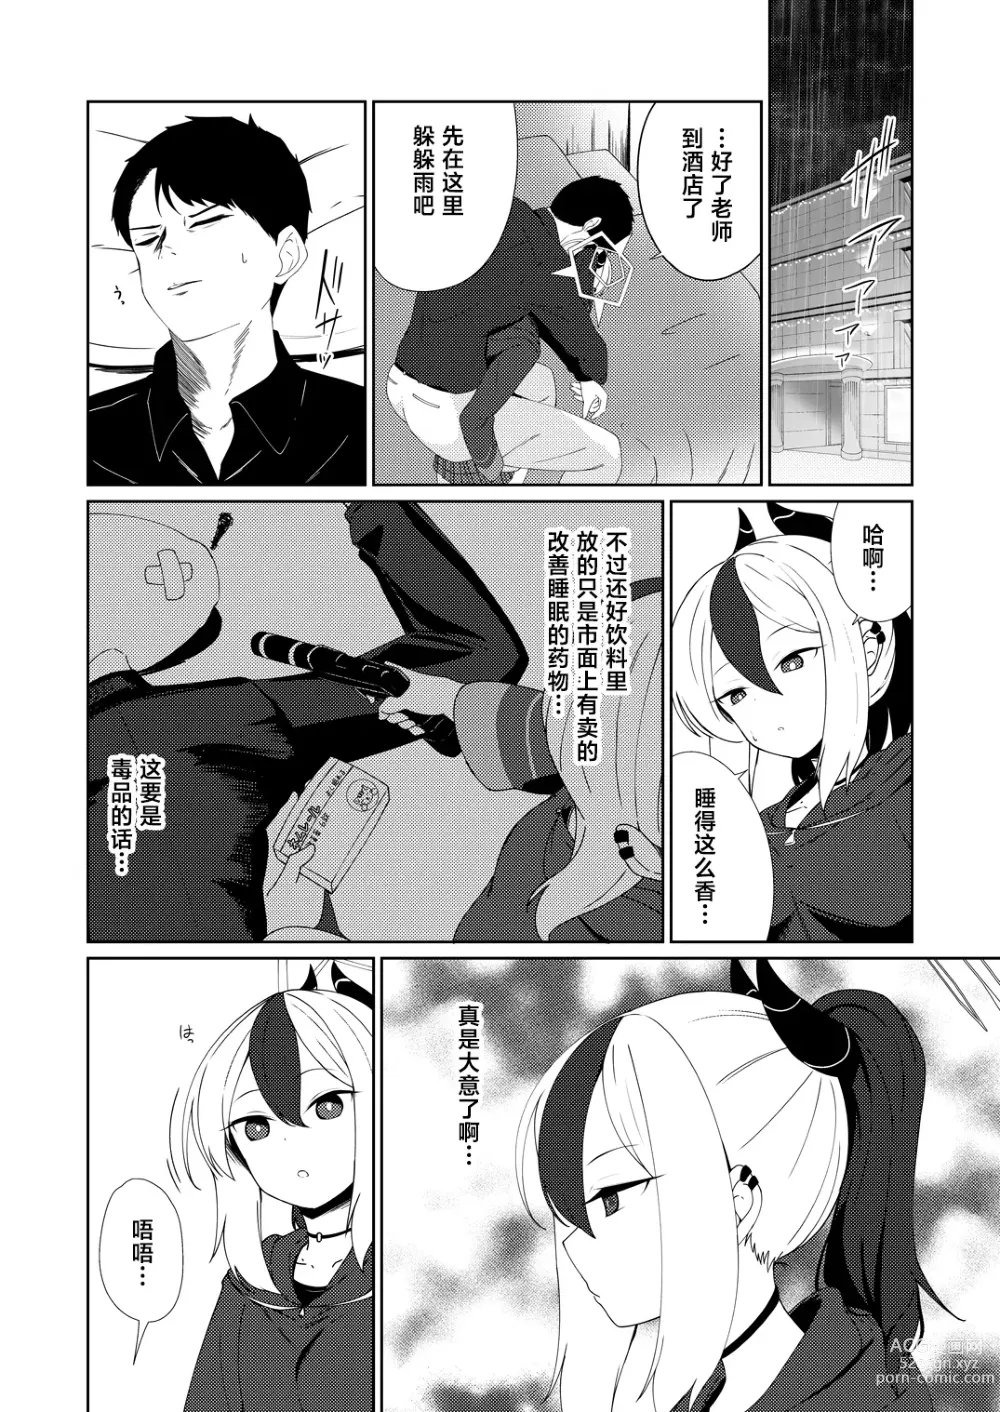 Page 6 of doujinshi 雨夜に蕩ける心拍音